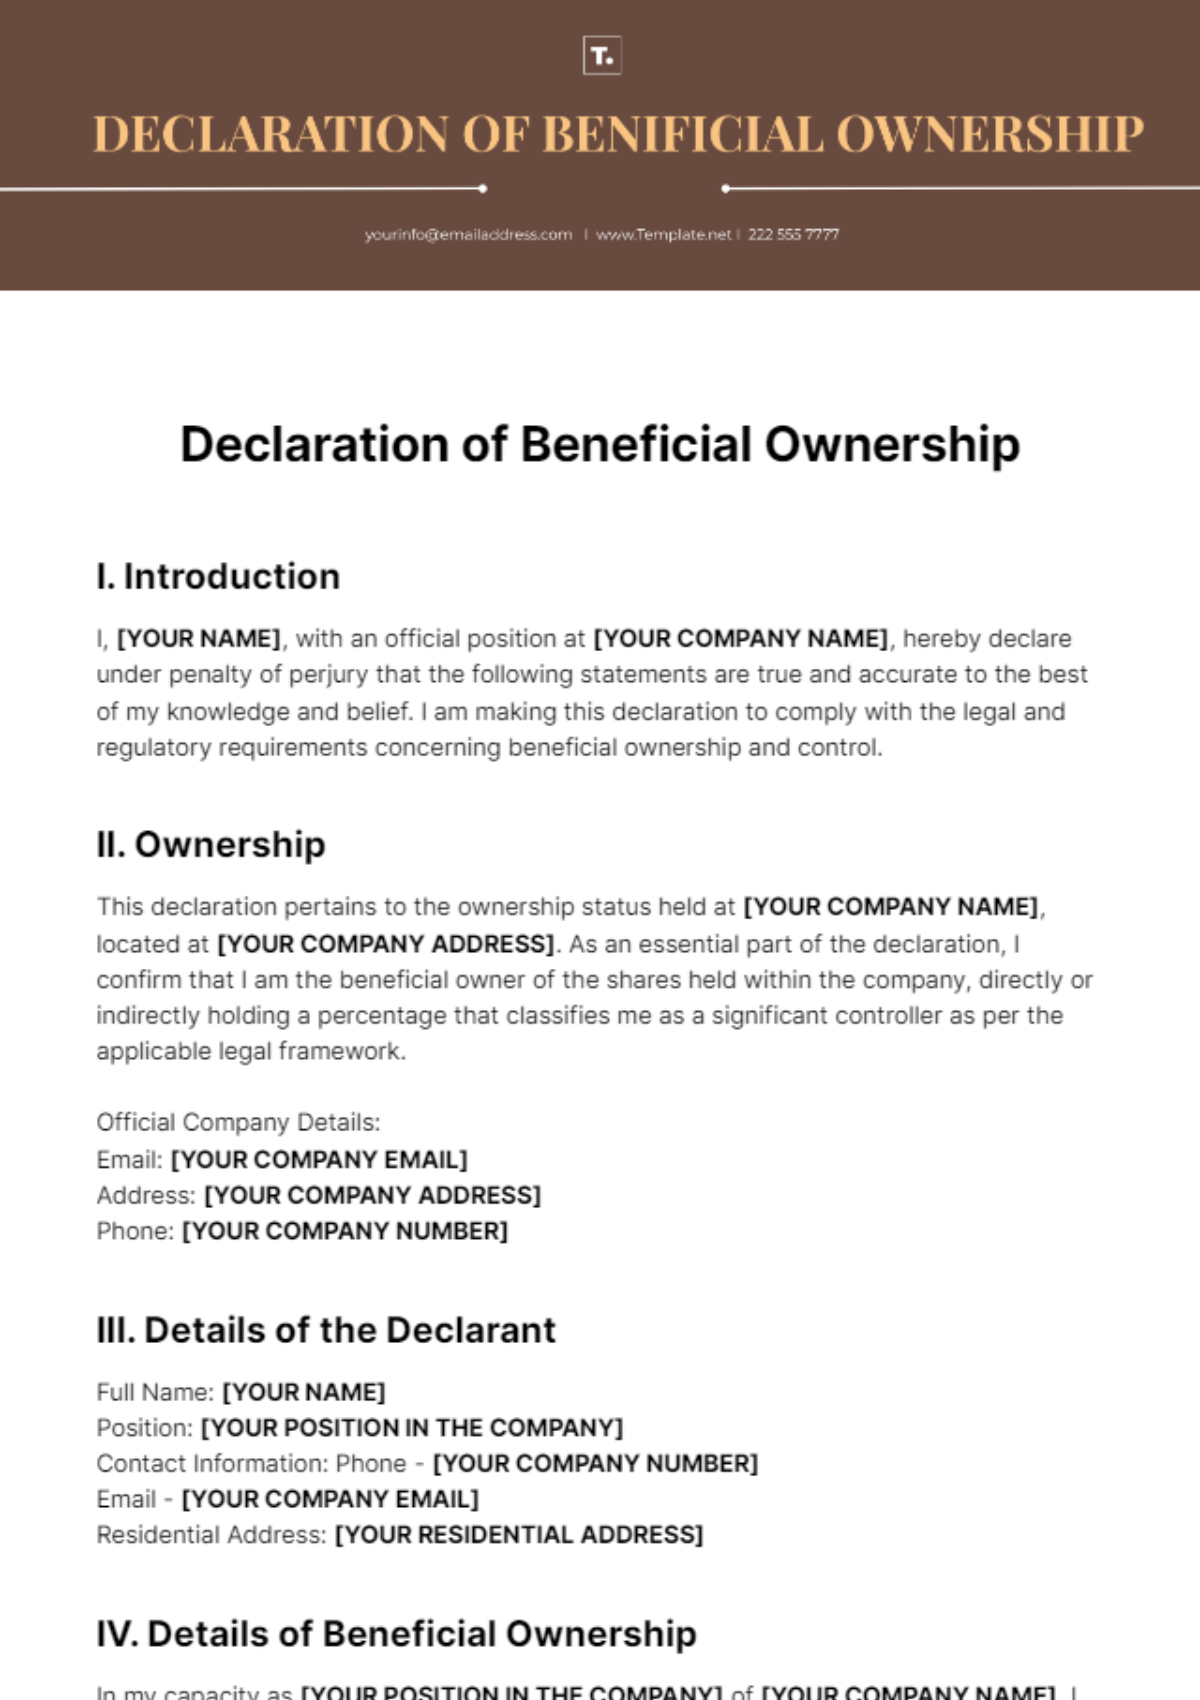 Declaration of Beneficial Ownership Template